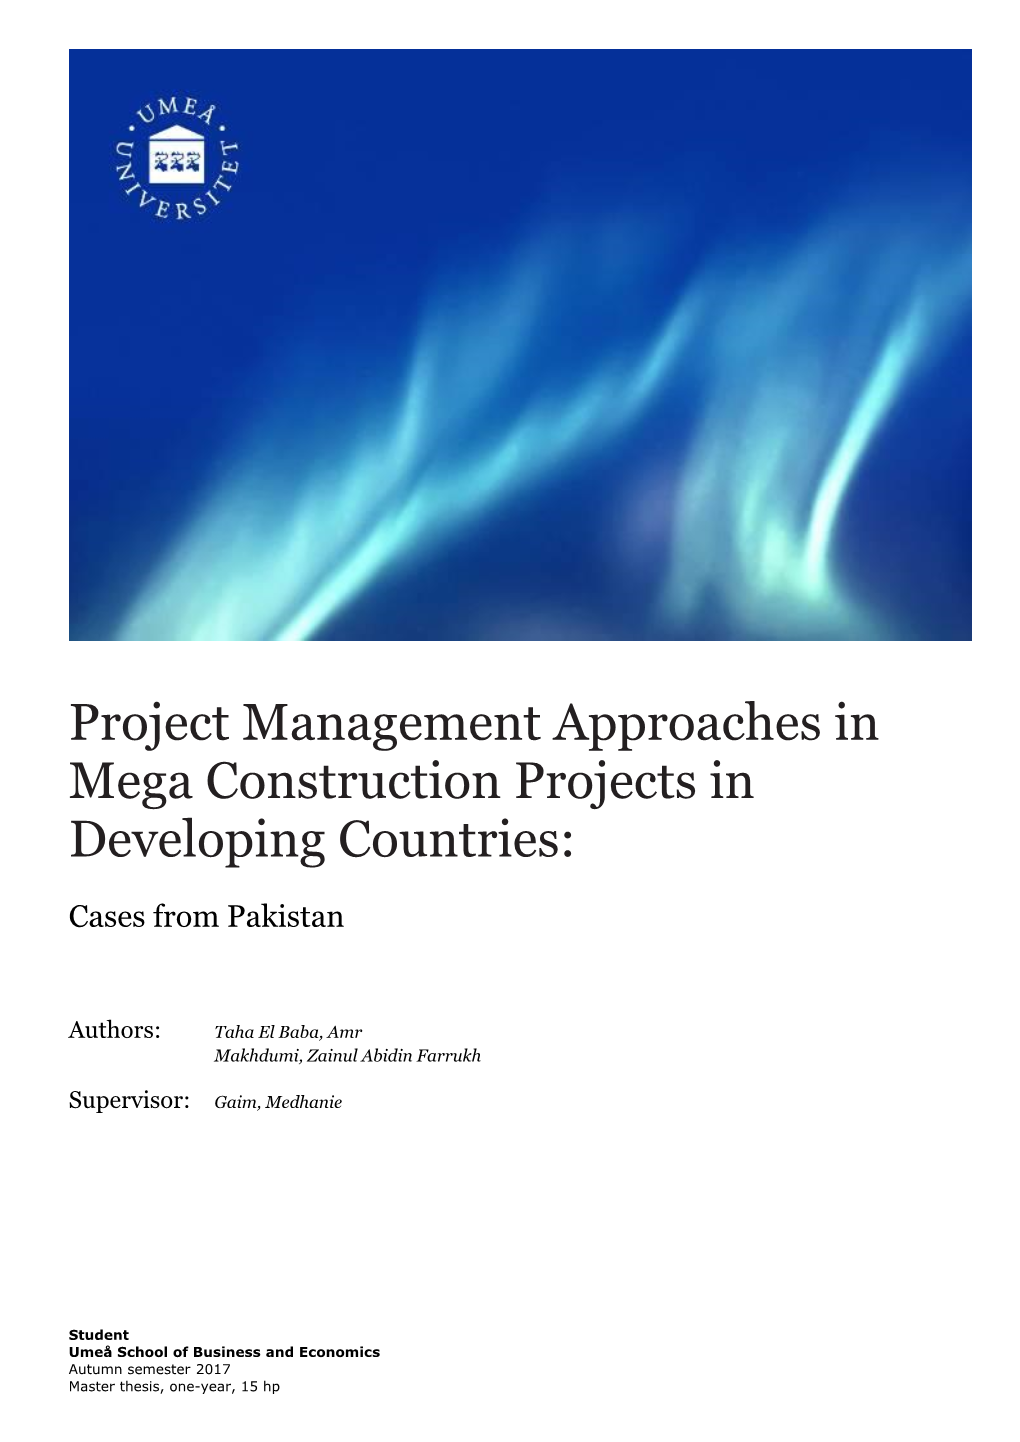 Project Management Approaches in Mega Construction Projects in Developing Countries